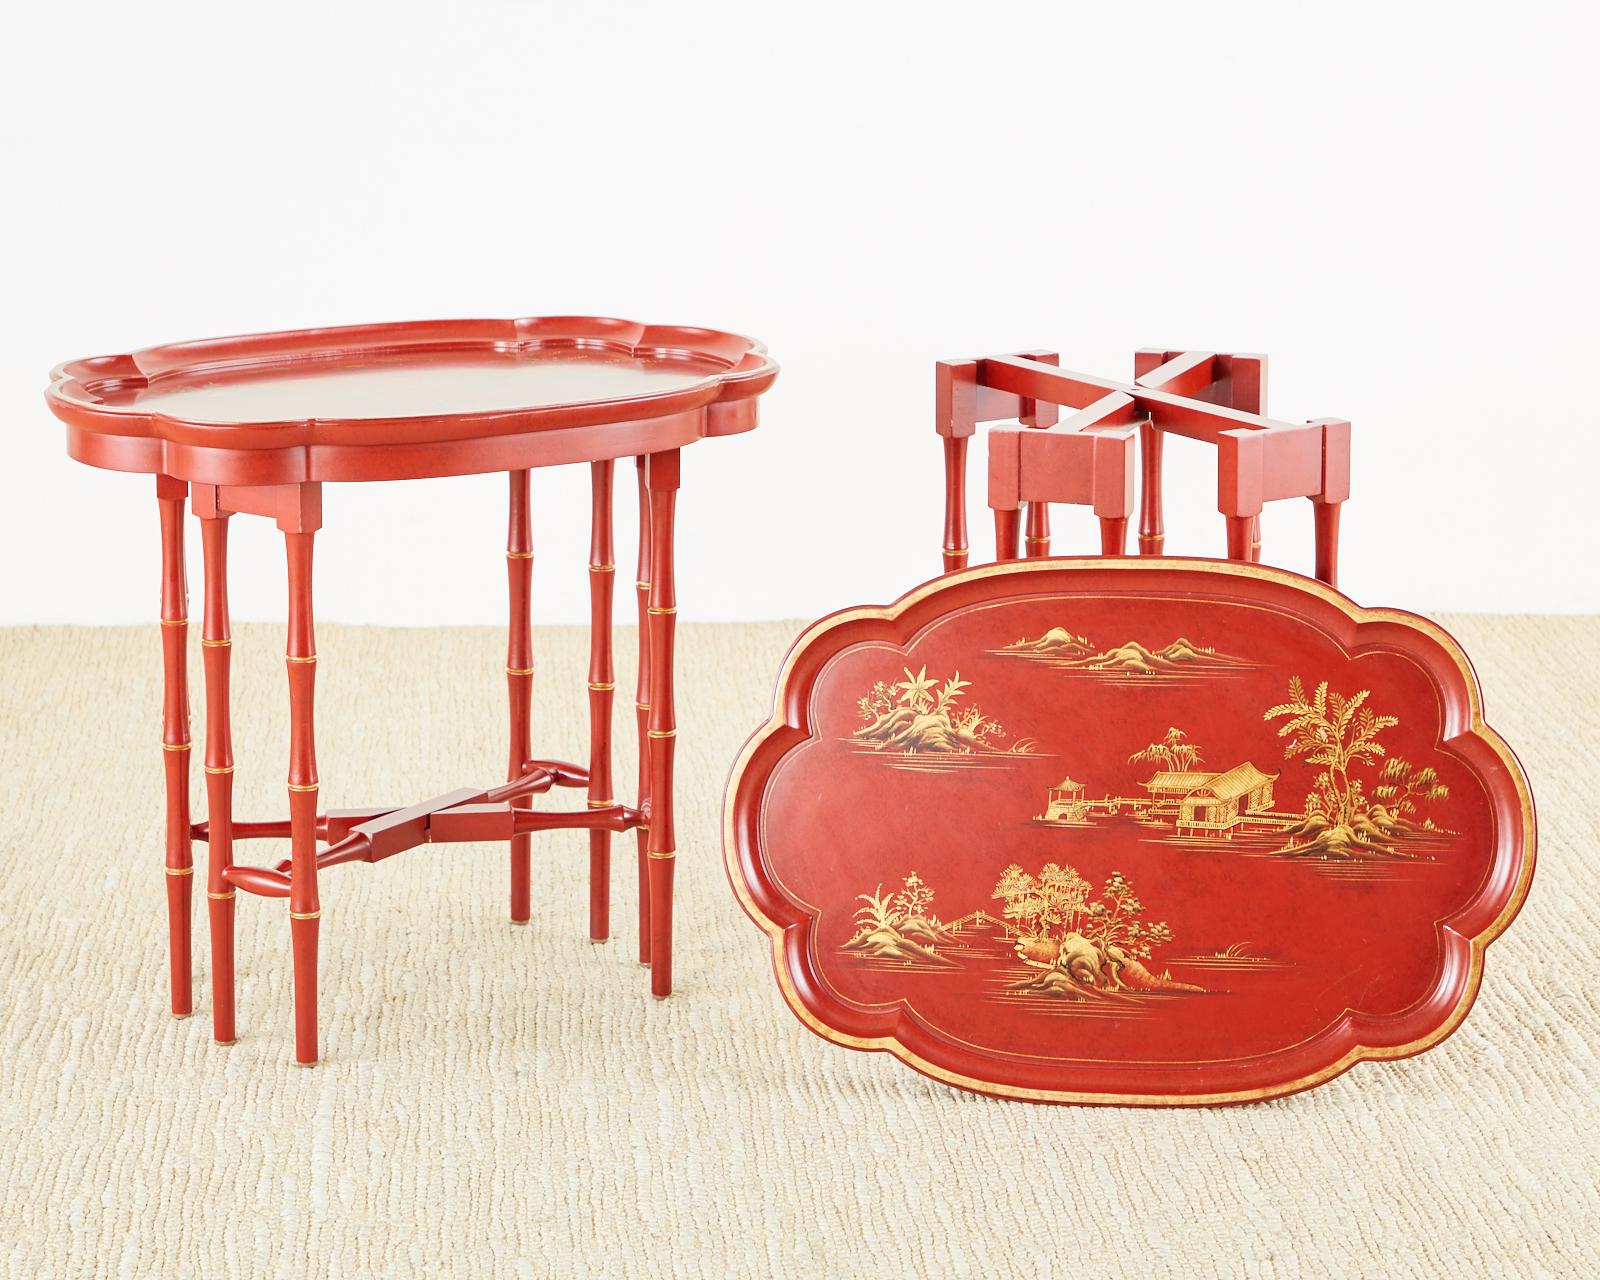 20th Century Pair of English Chinoiserie Style Faux Bamboo Tray Tables